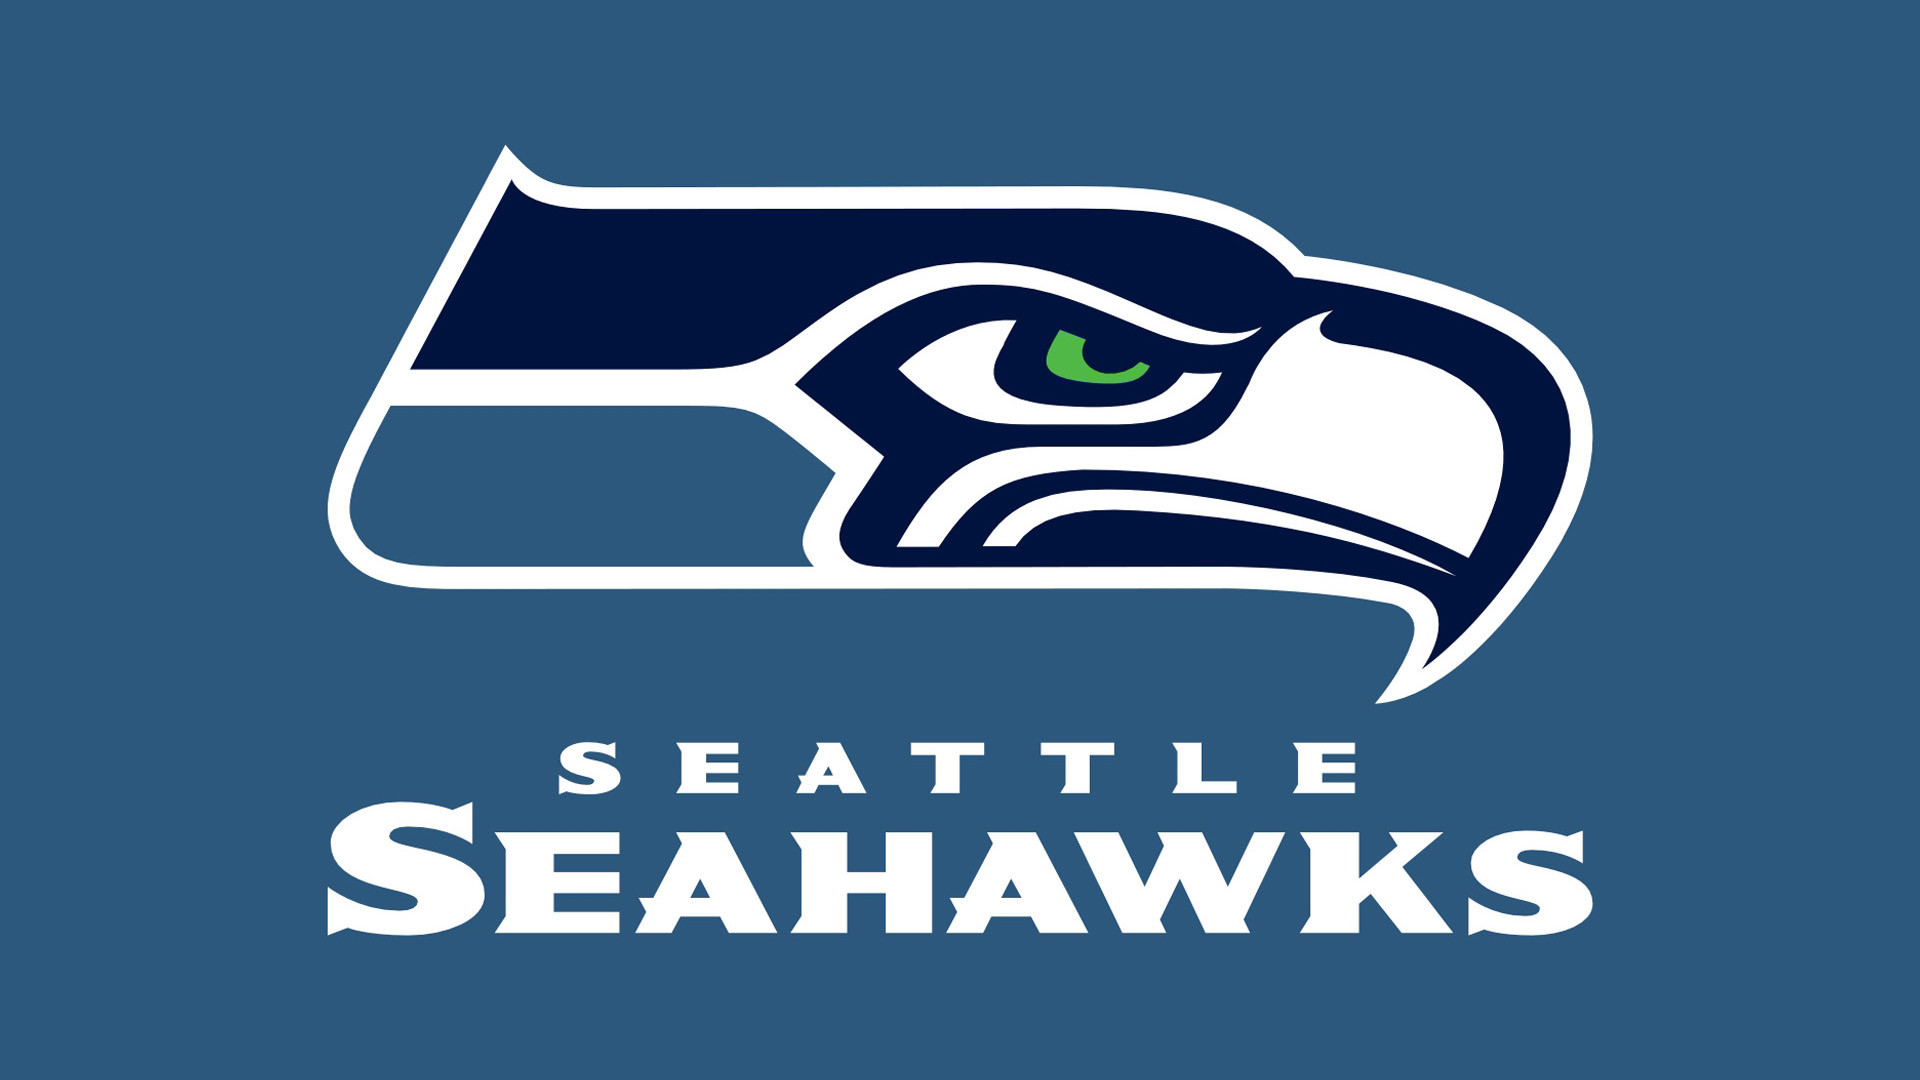 Published February 14, 2010 at 1920 1080 in NFL Team Logos Wallpapers